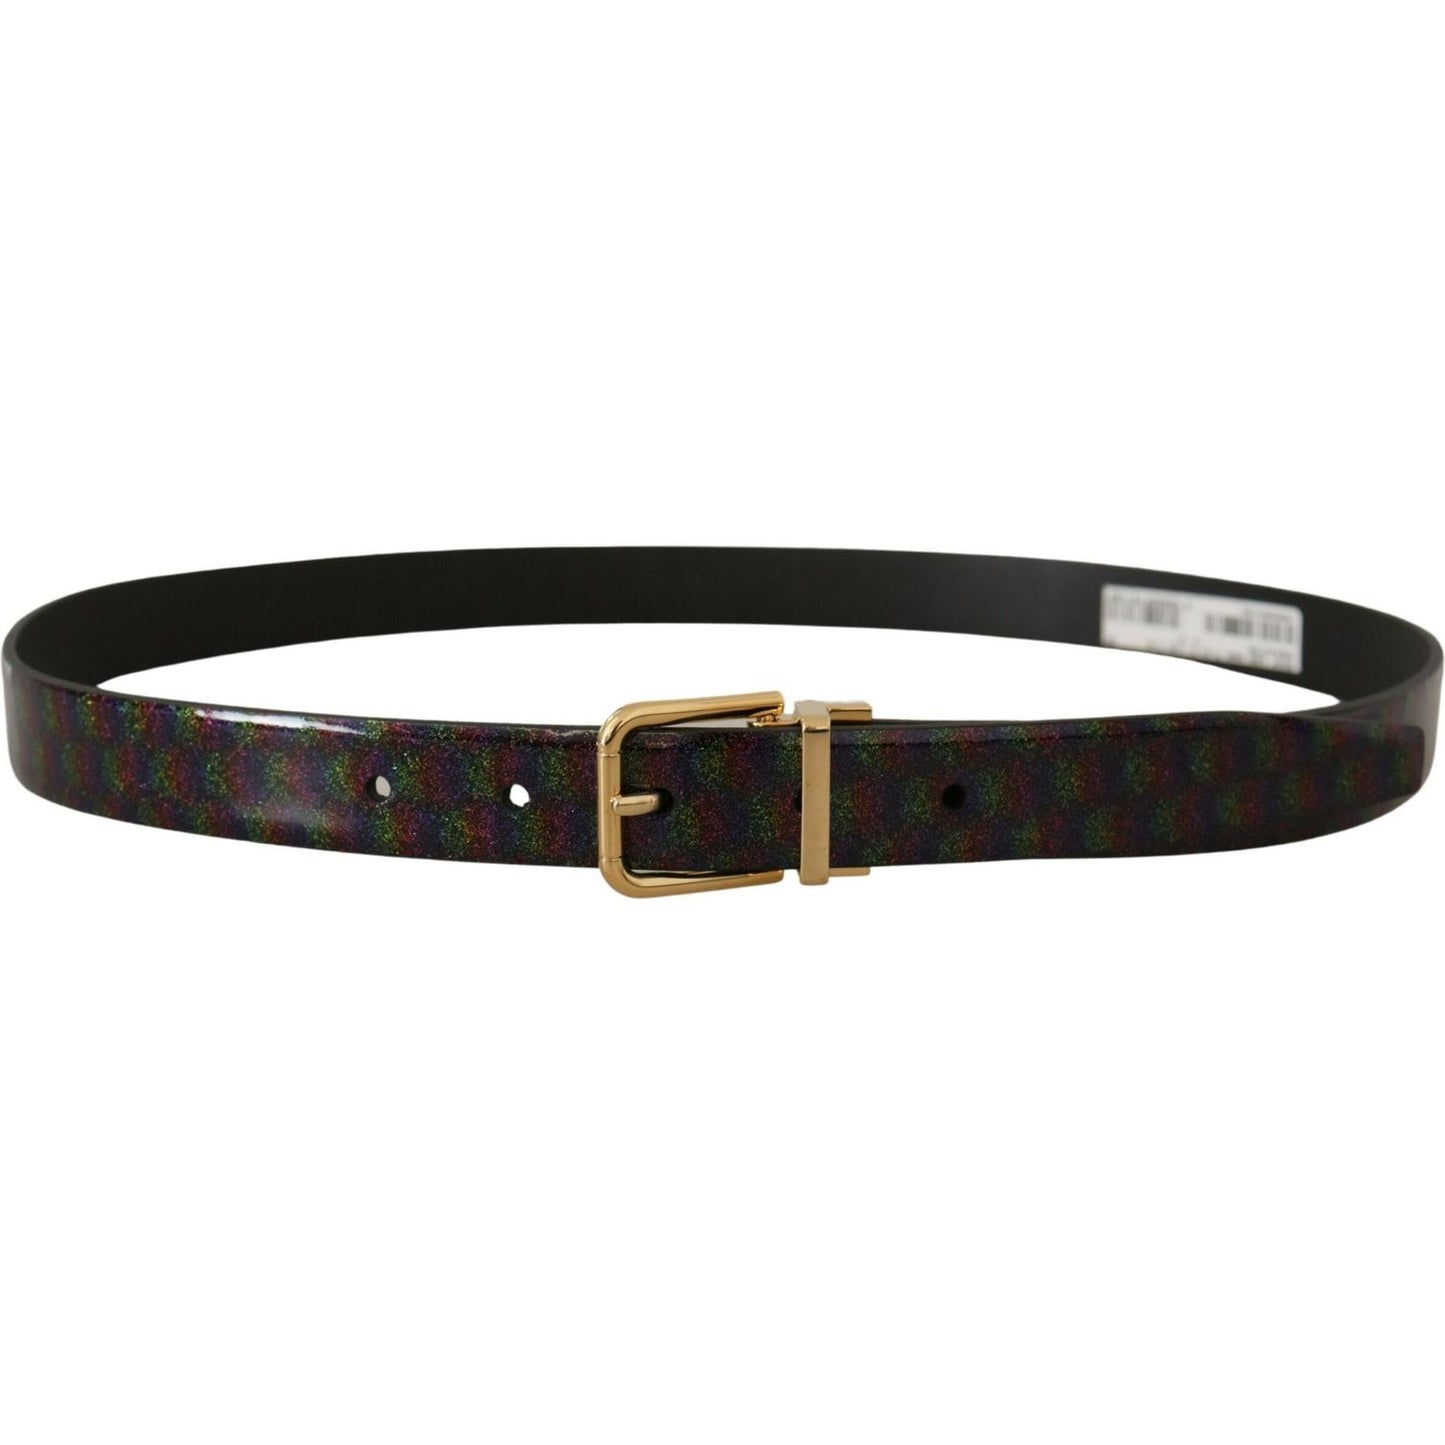 Elegant Vernice Leather Belt with Silver Buckle